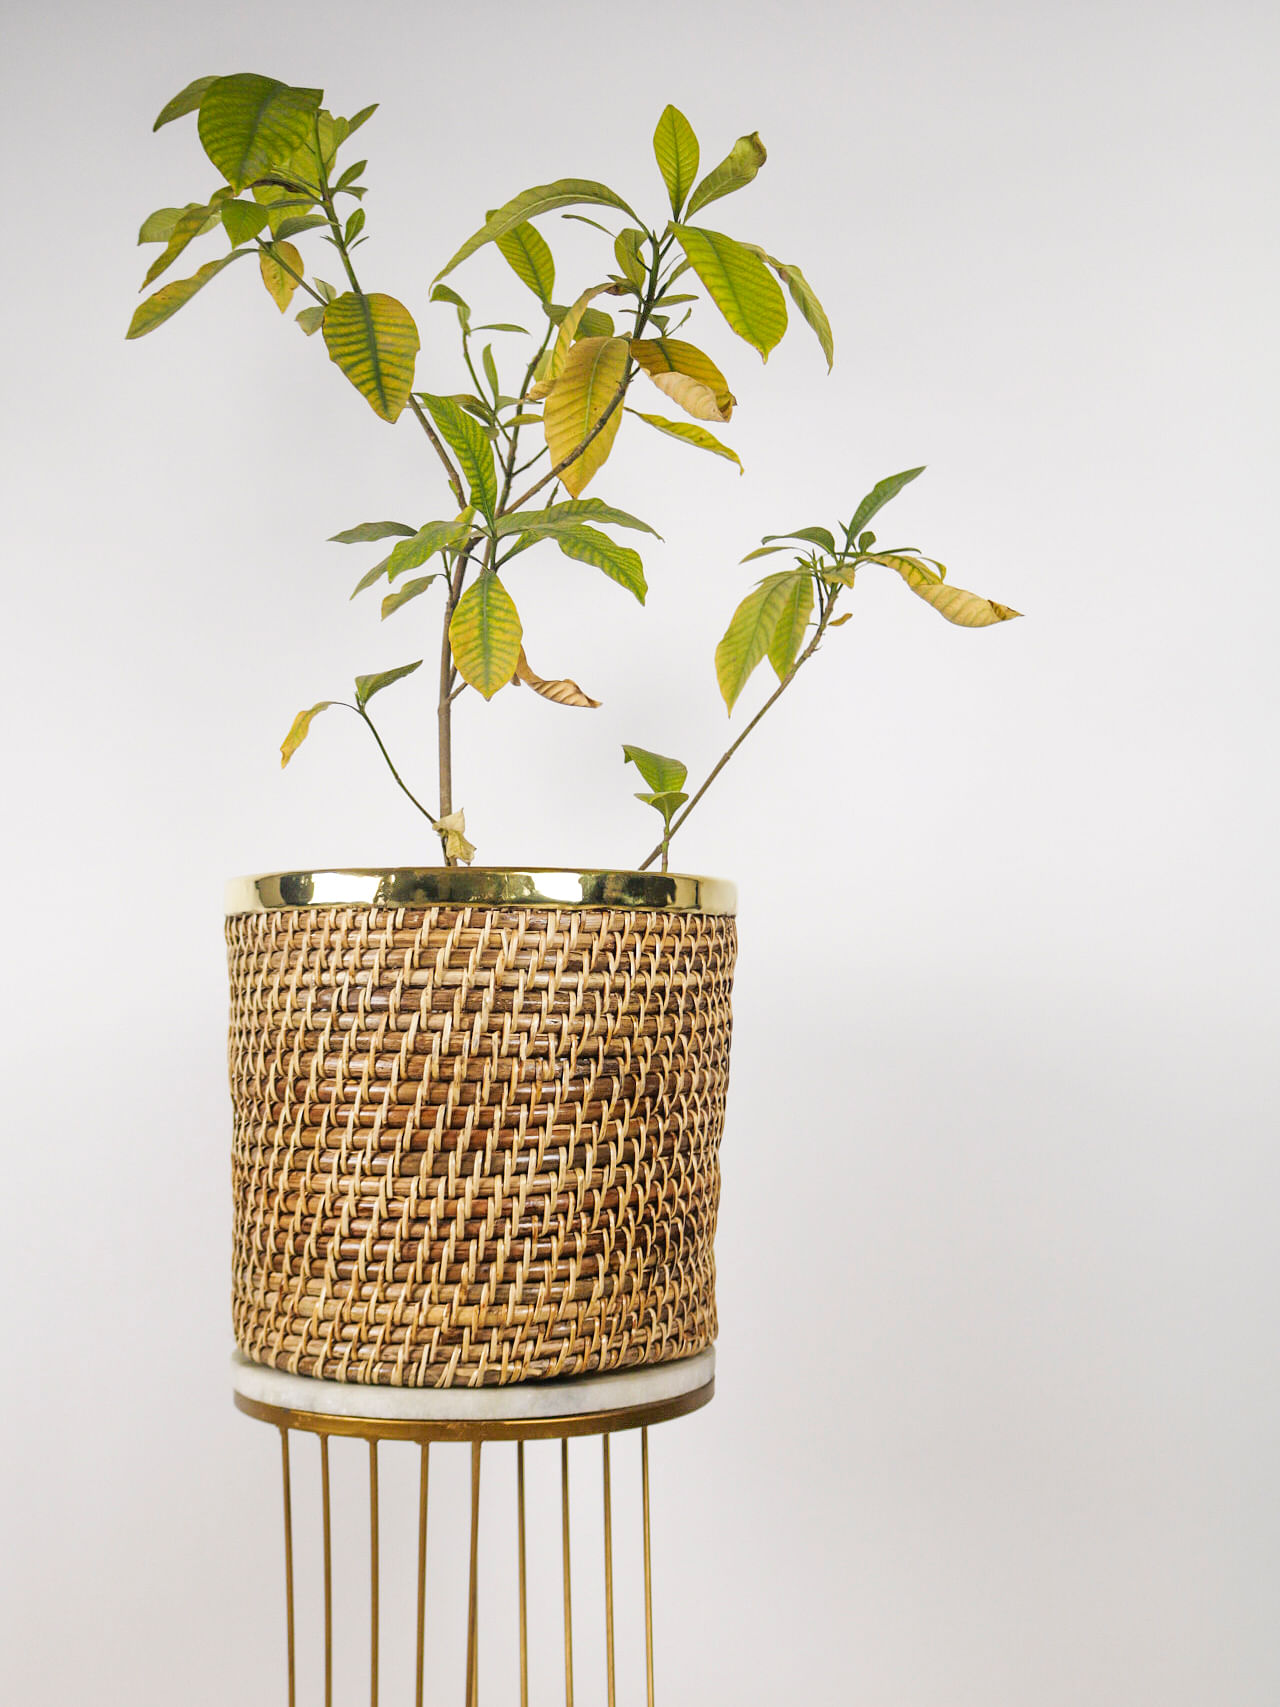 The Round Side Planter-12"